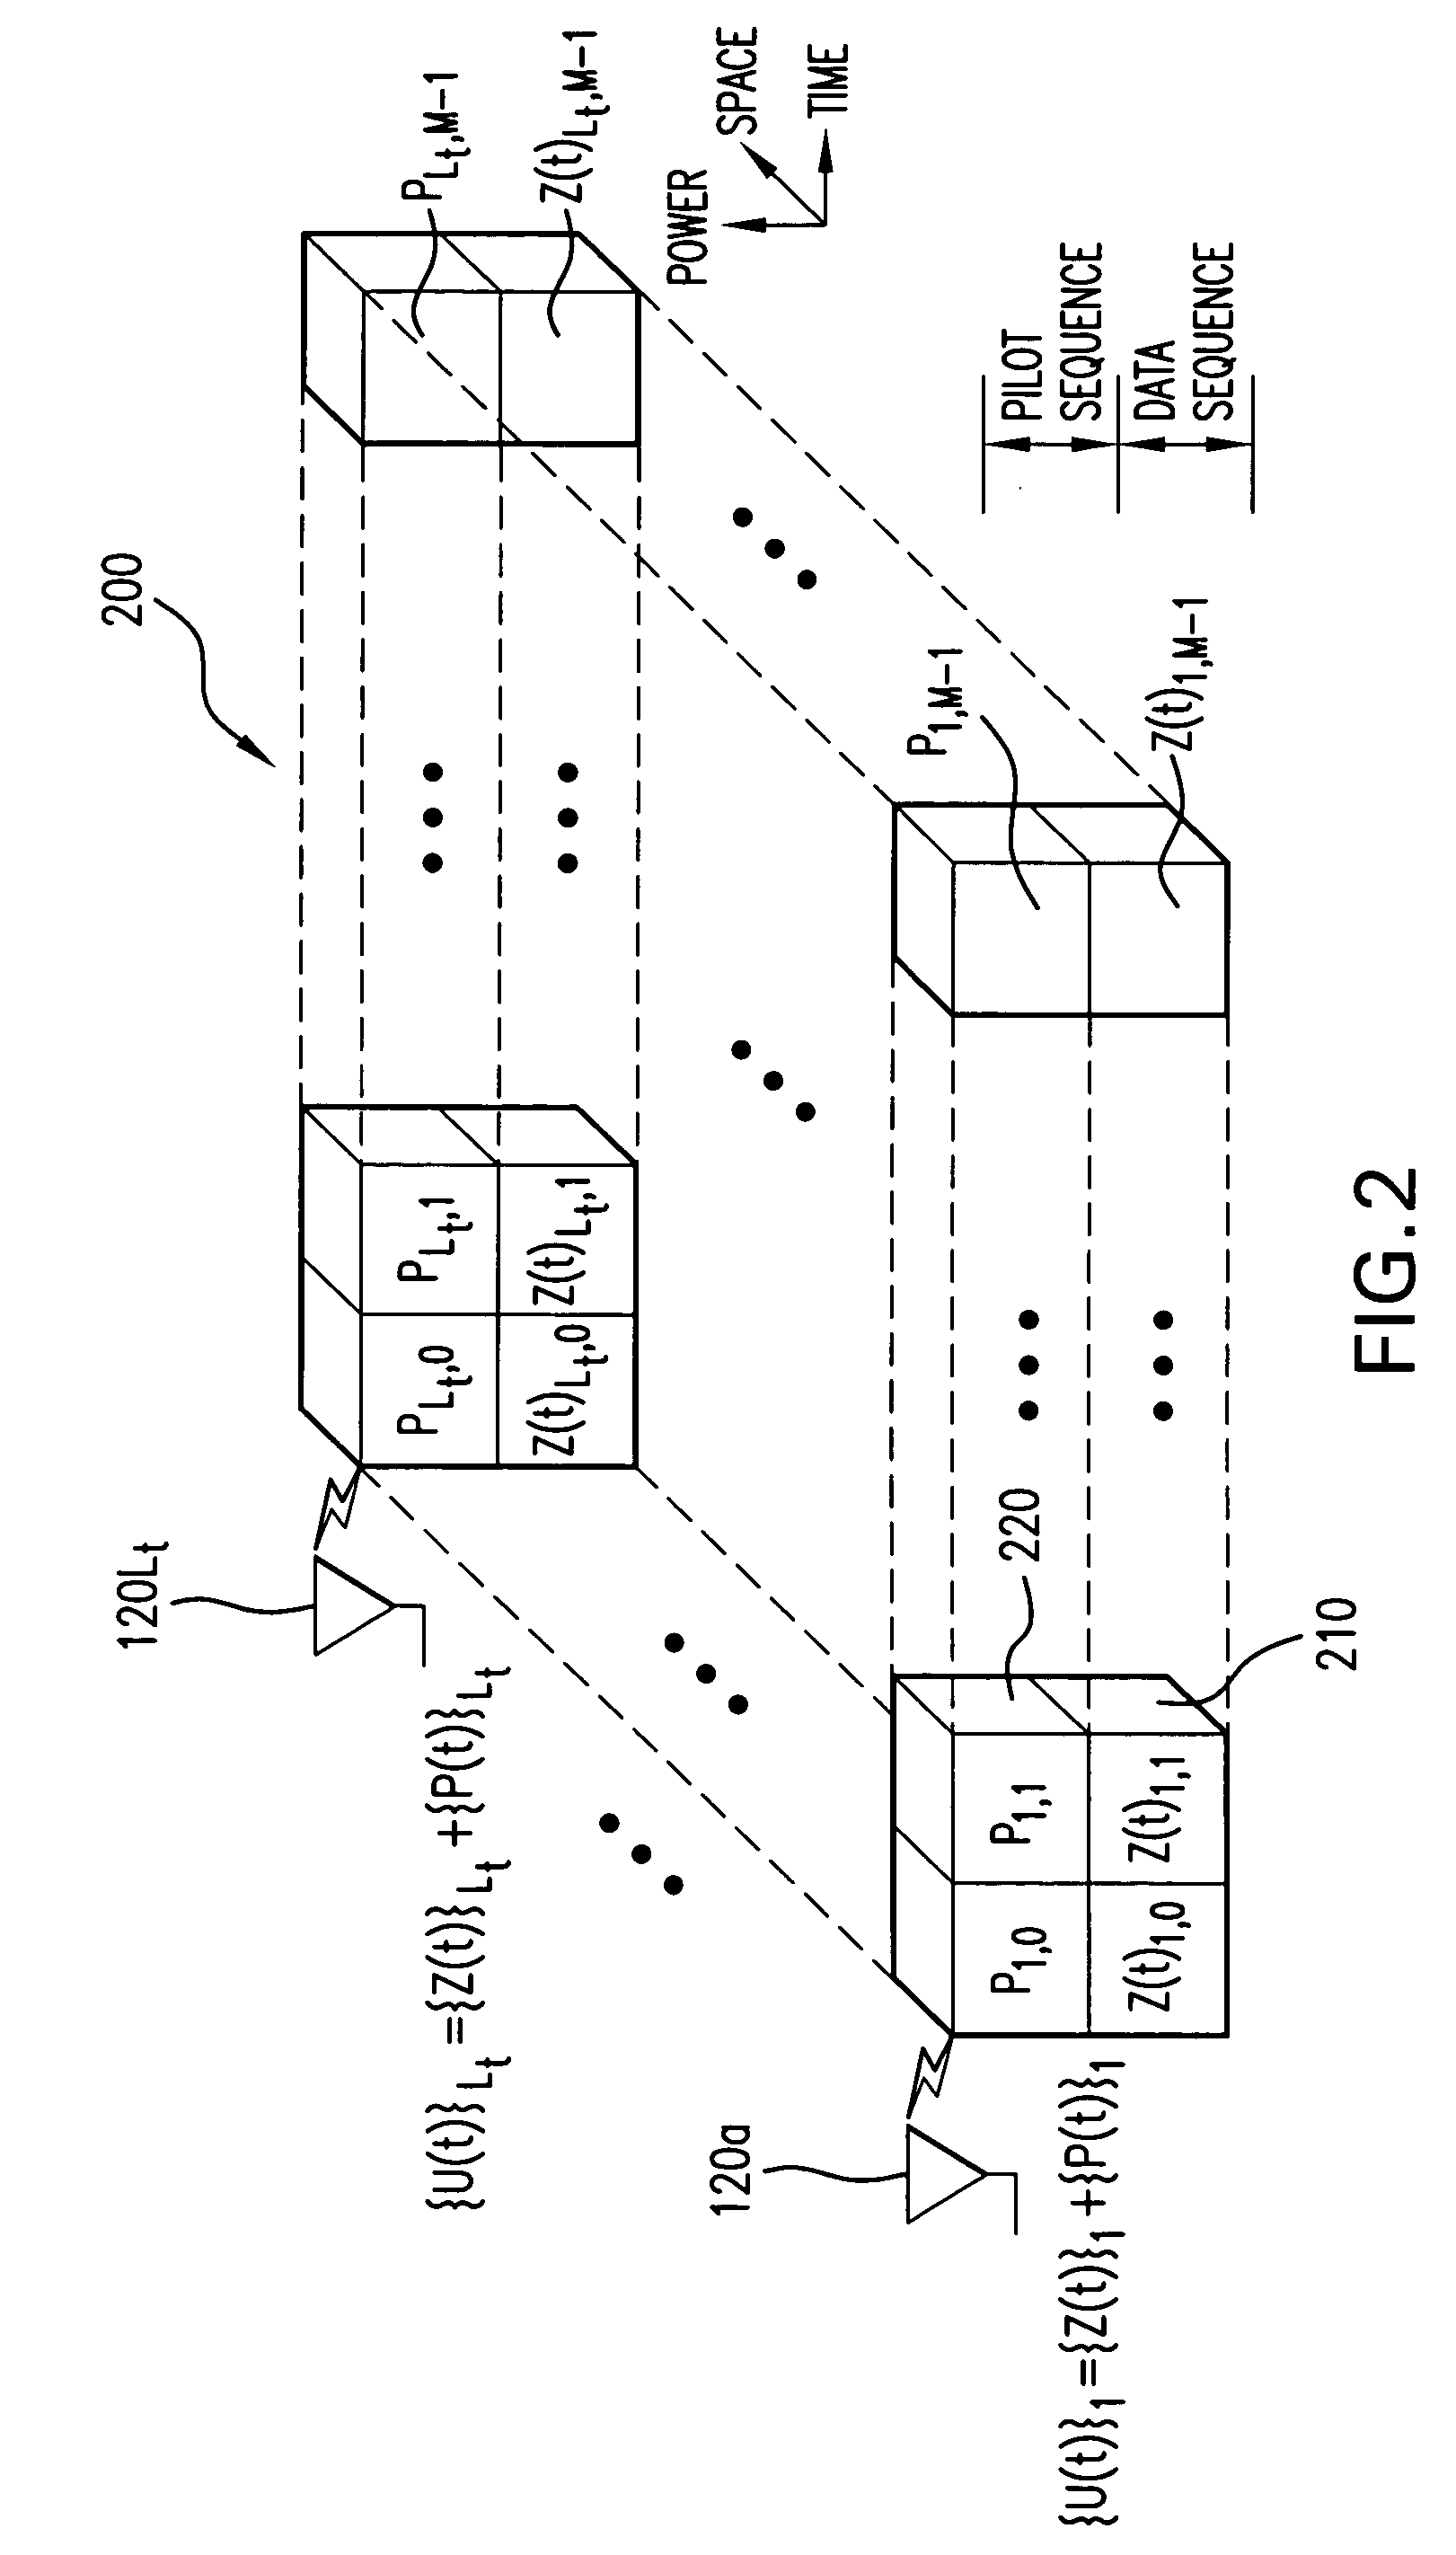 Data communication with embedded pilot information for timely channel estimation